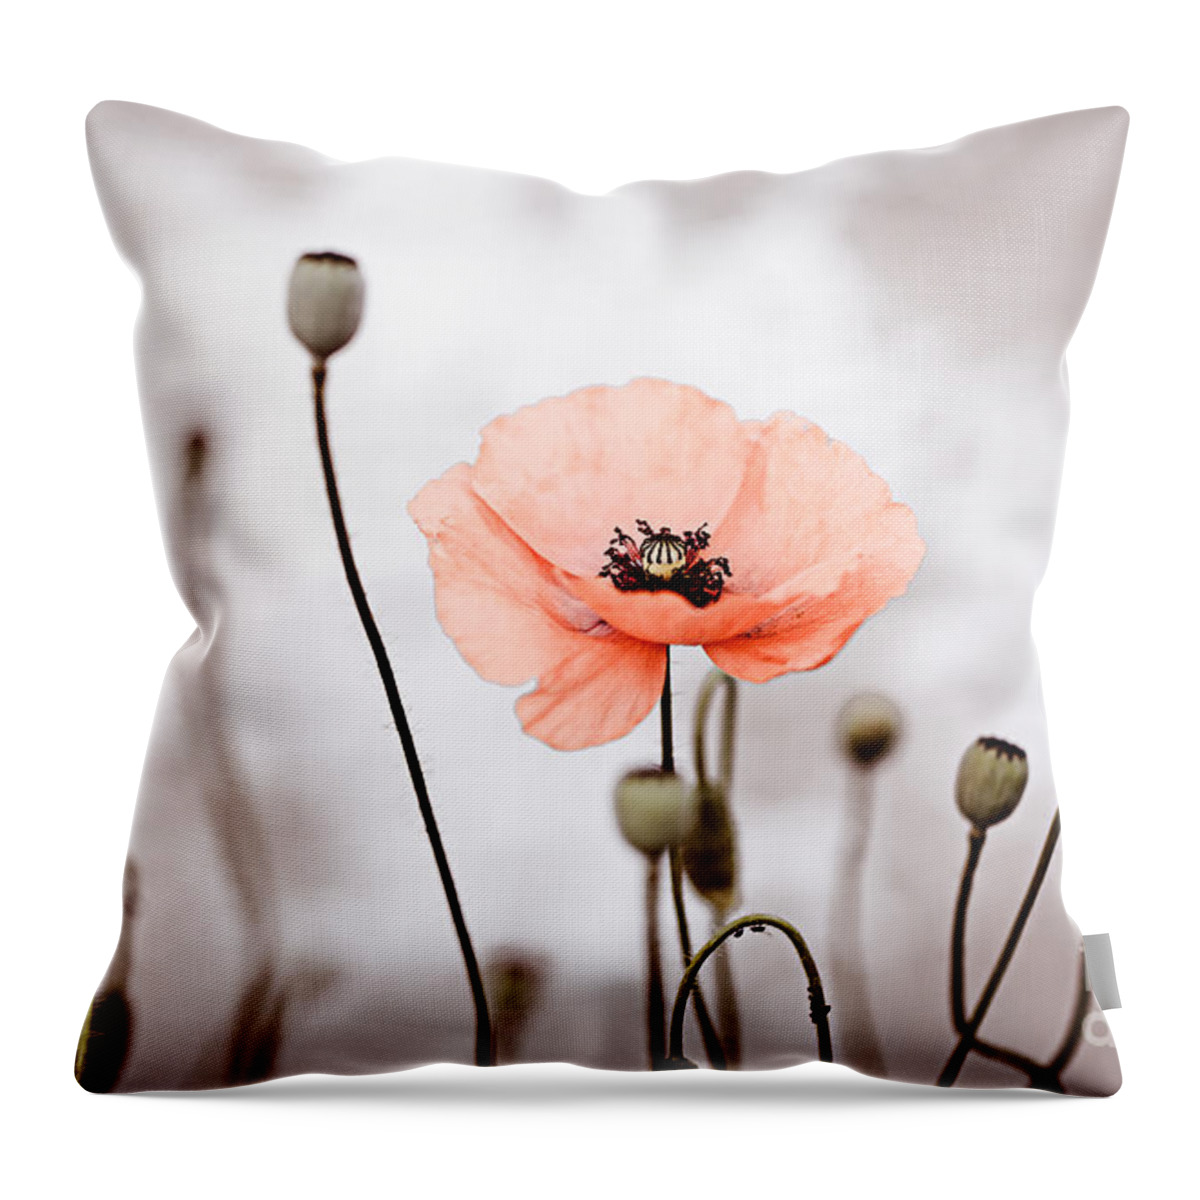 Poppy Throw Pillow featuring the photograph Red Corn Poppy Flowers 01 by Nailia Schwarz